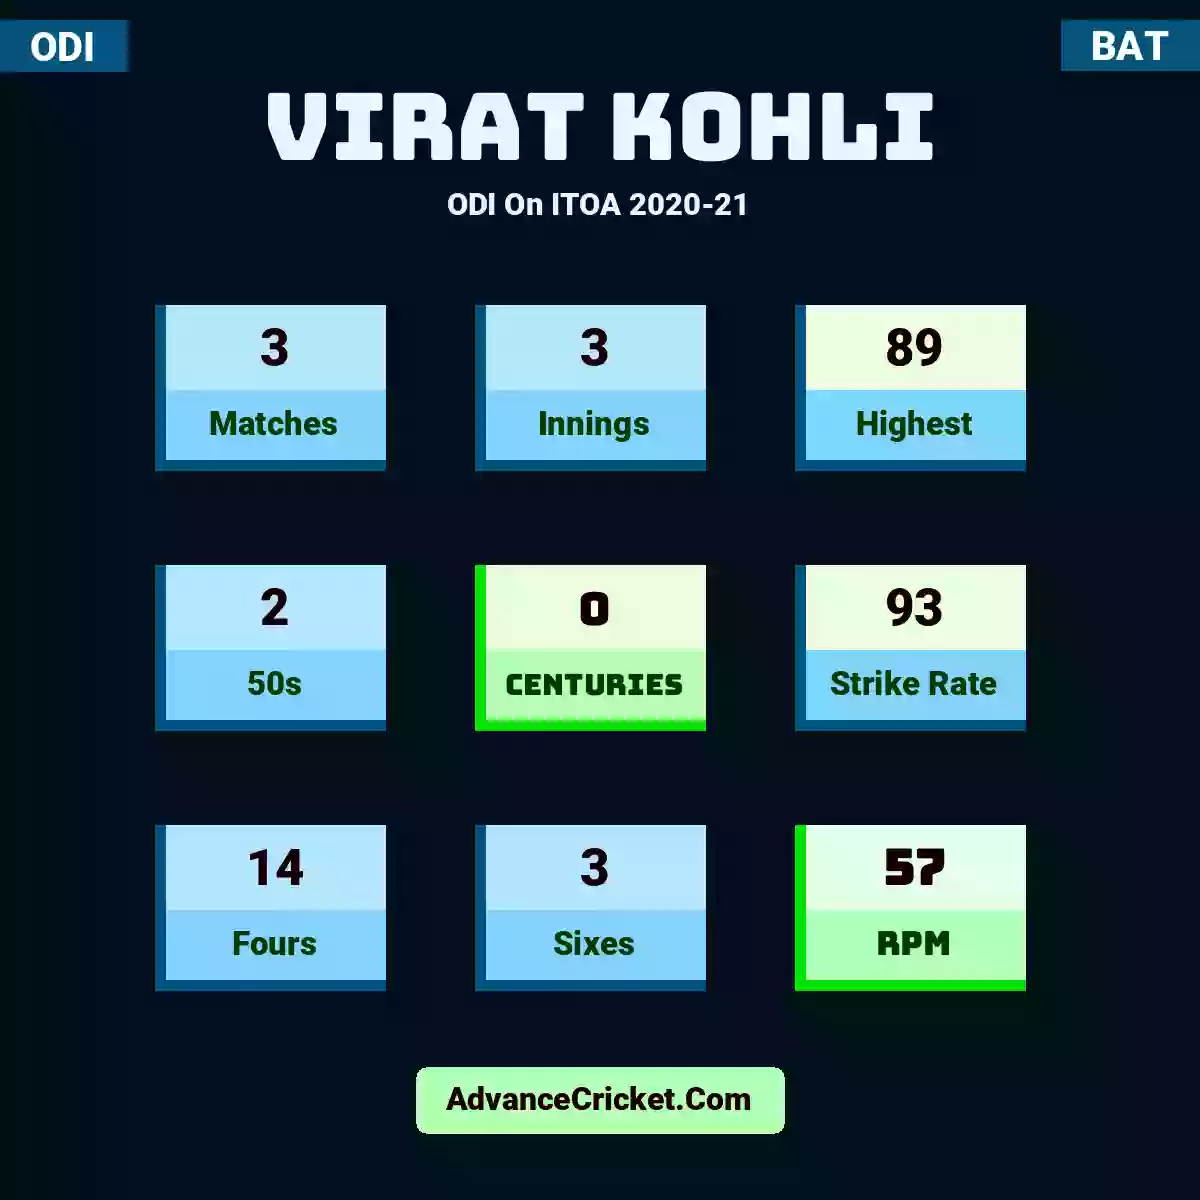 Virat Kohli ODI  On ITOA 2020-21, Virat Kohli played 3 matches, scored 89 runs as highest, 2 half-centuries, and 0 centuries, with a strike rate of 93. V.Kohli hit 14 fours and 3 sixes, with an RPM of 57.